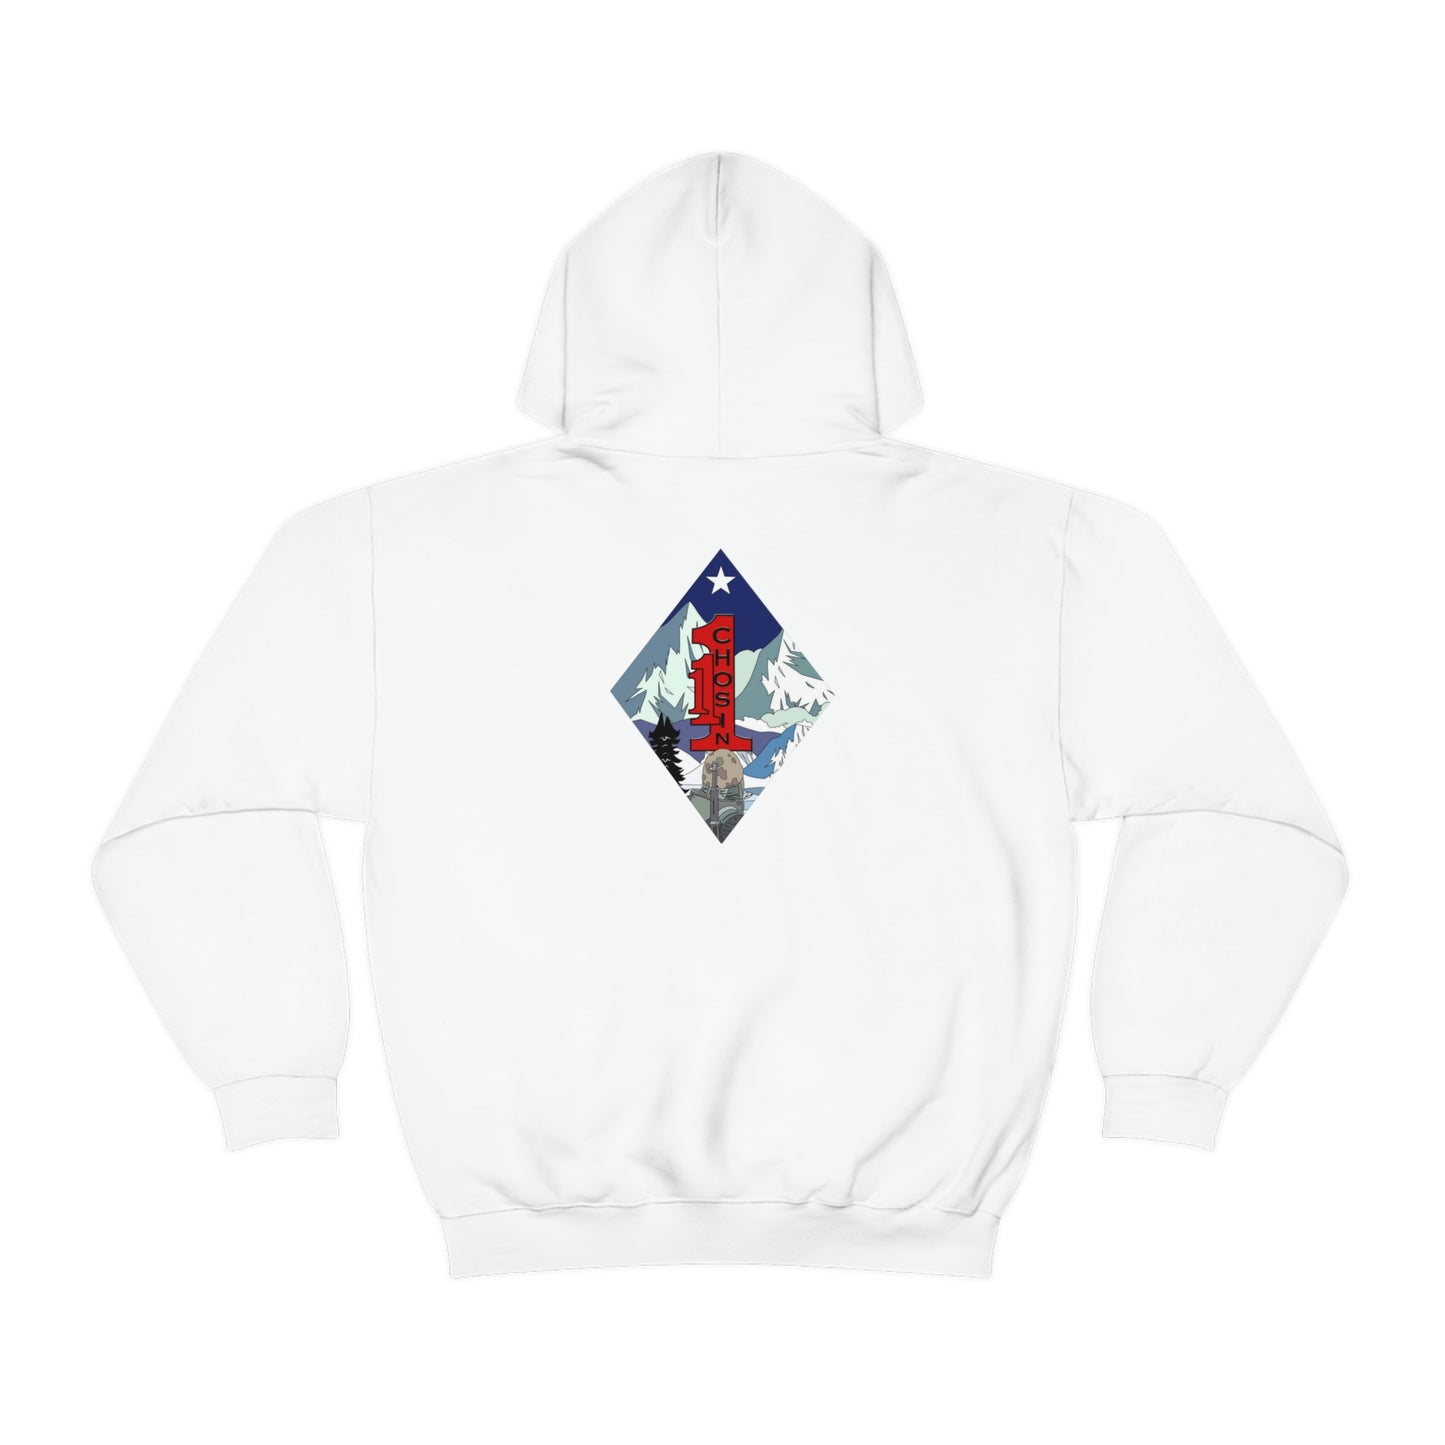 Chosin 1/1 First of the First Hoodie